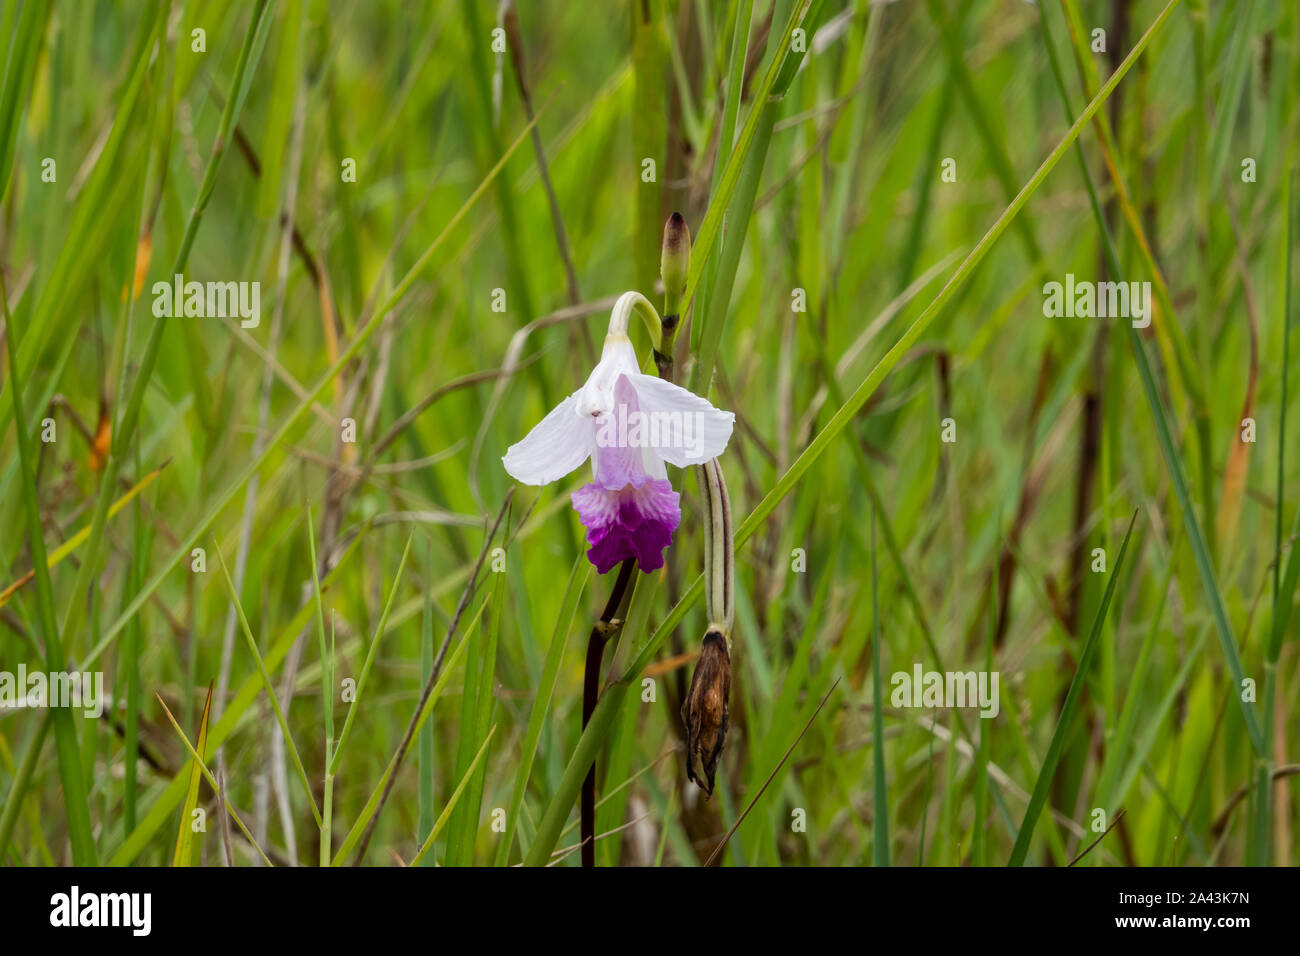 Bamboo Orchid Flower in Bloom Stock Photo